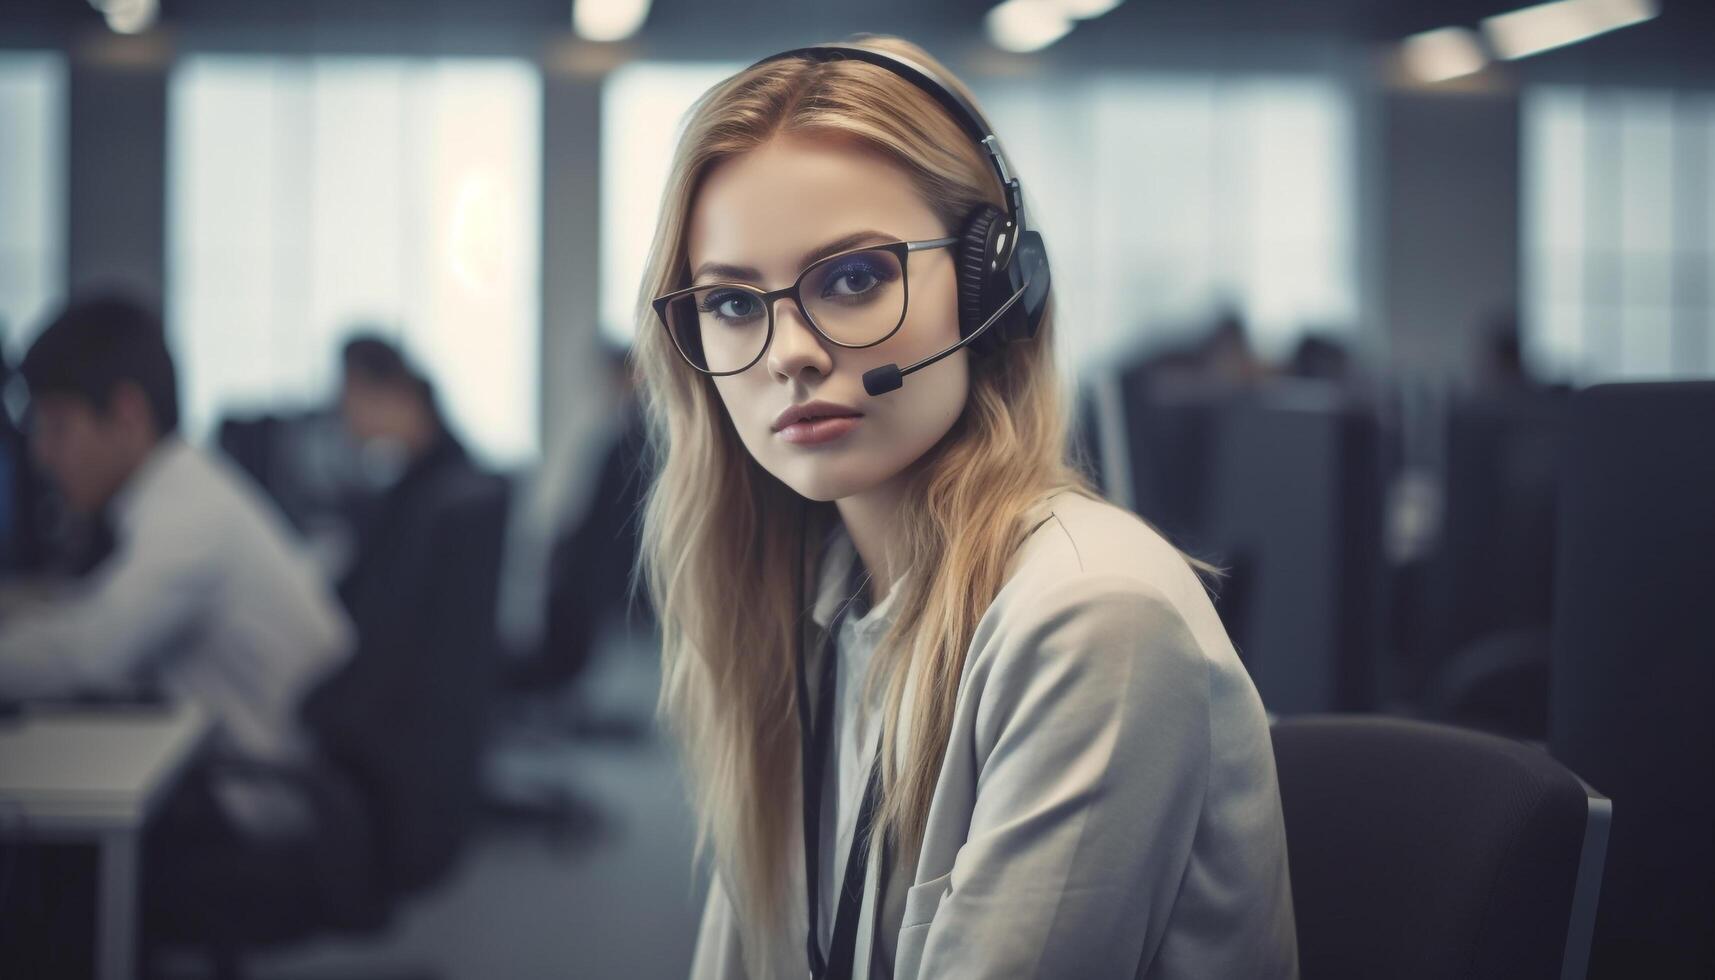 Young adult businesswoman smiling confidently, headset on, in office setting generated by AI photo